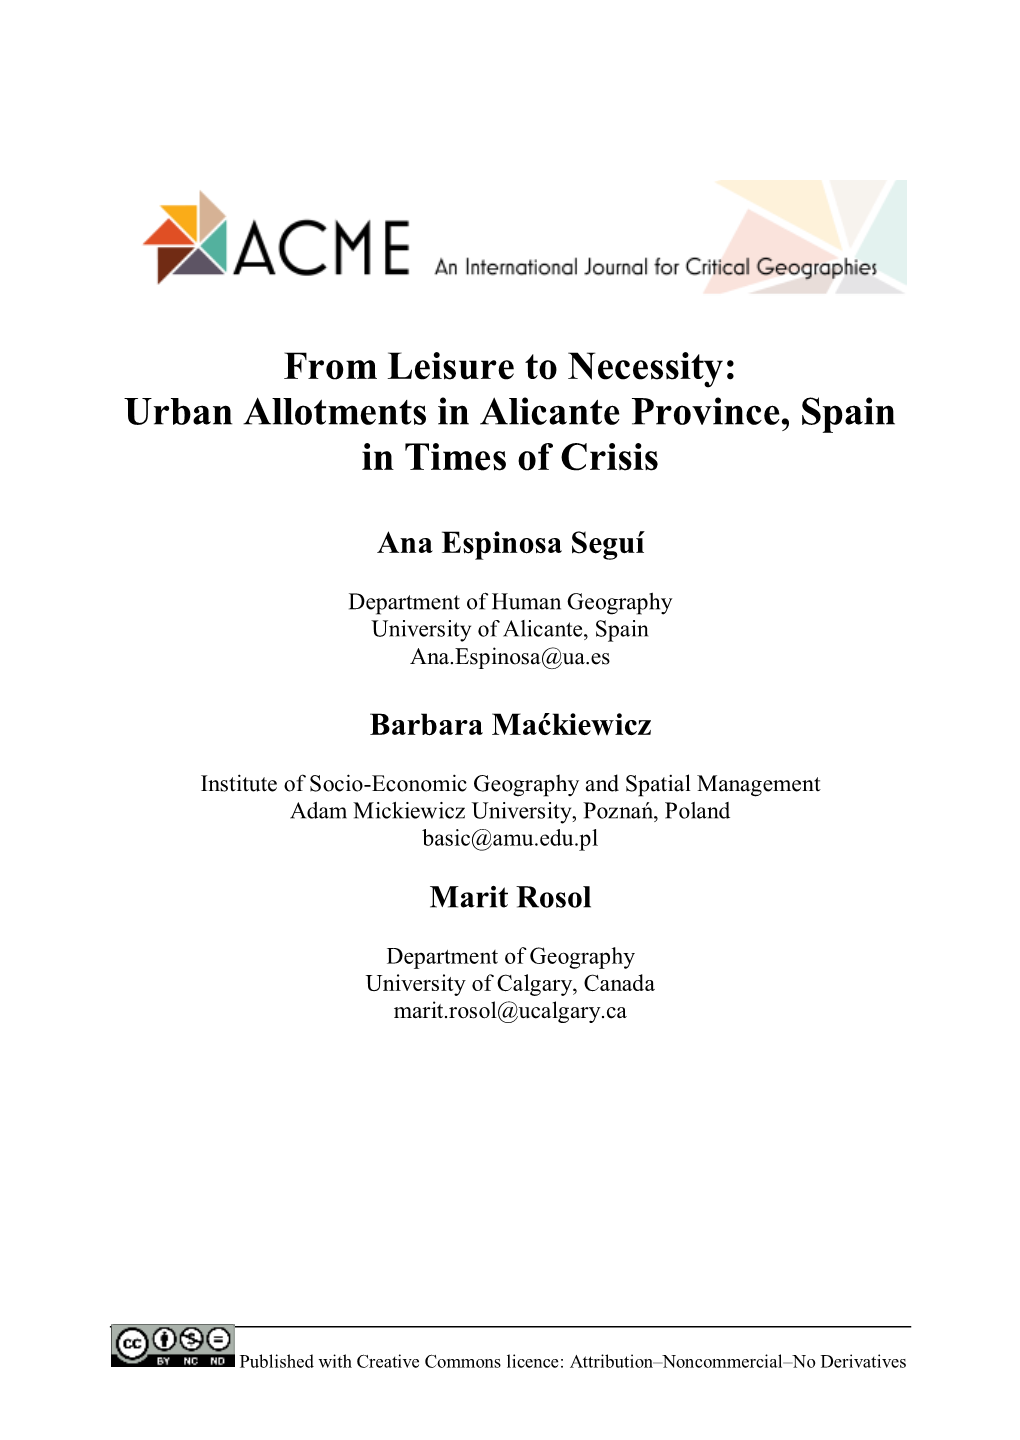 From Leisure to Necessity: Urban Allotments in Alicante Province, Spain in Times of Crisis